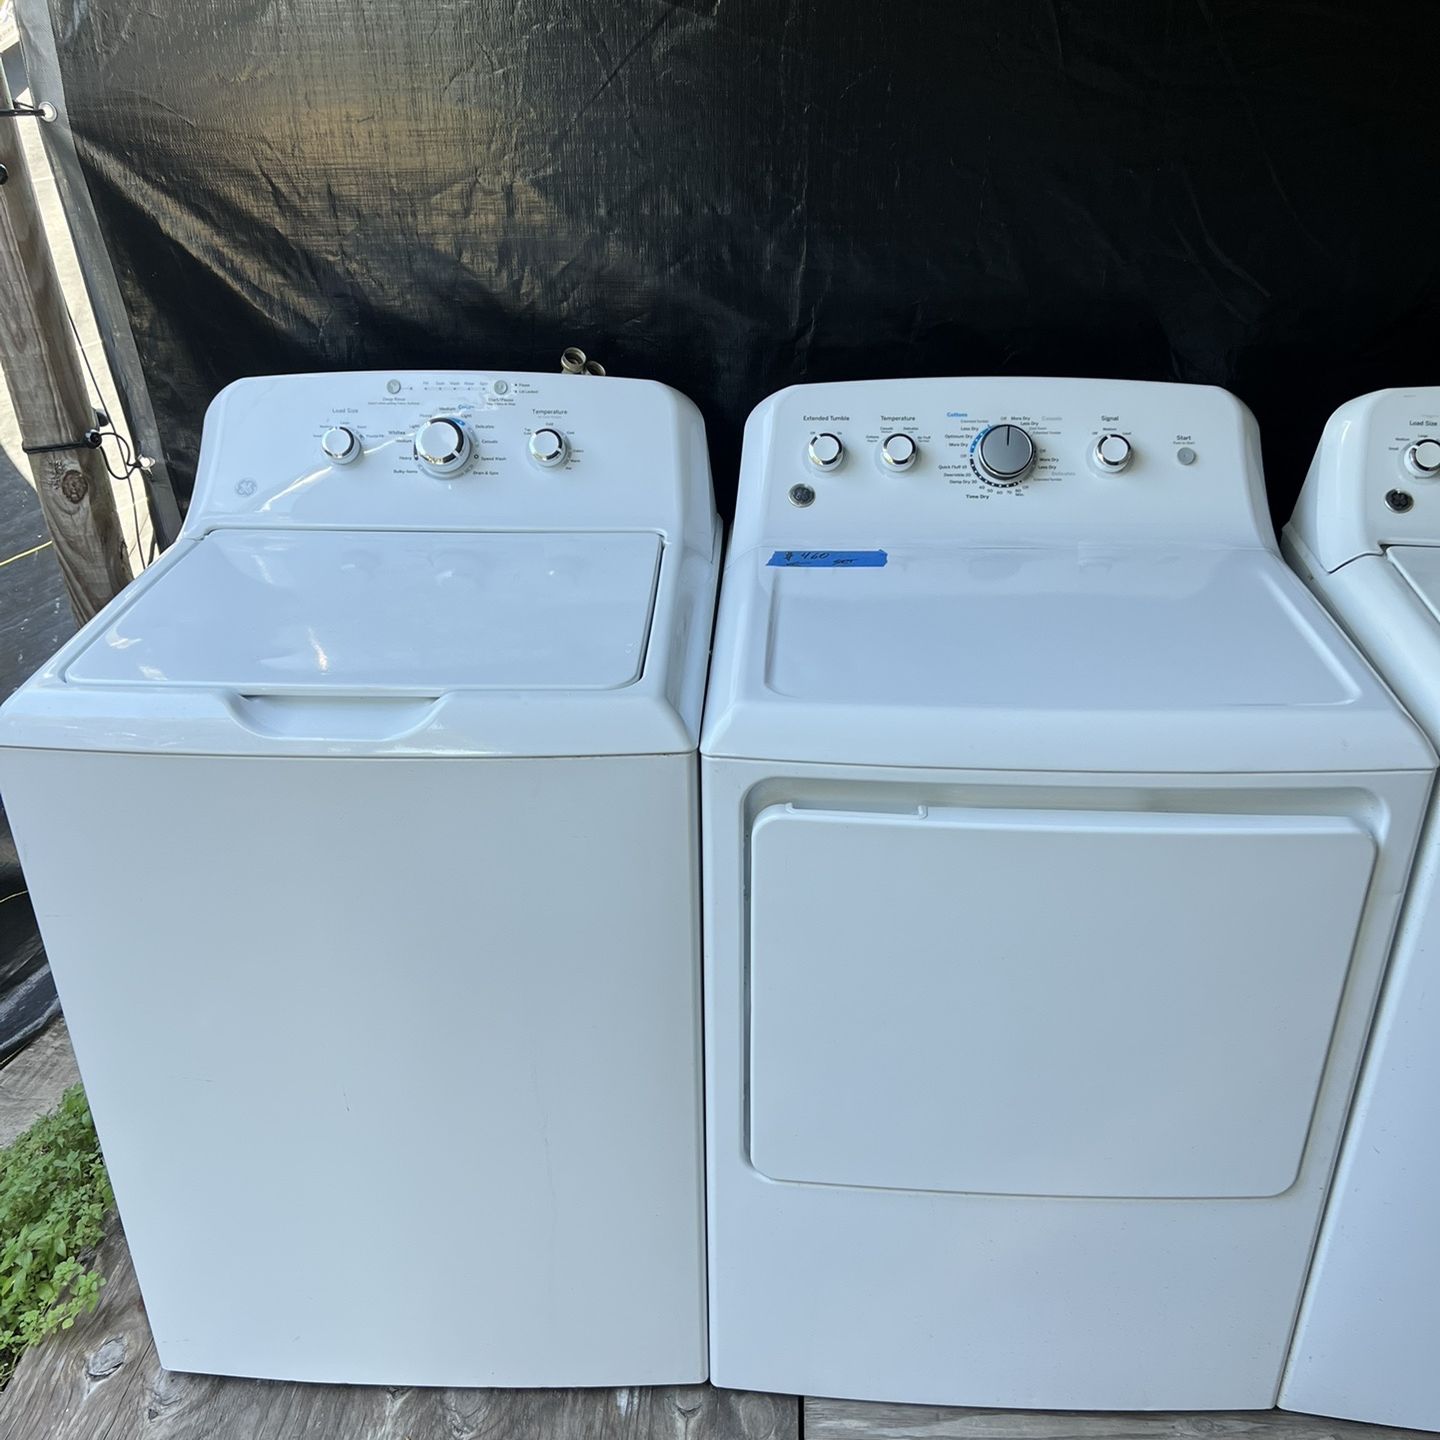 Ge Washer&dryer Large Capacity   60 day warranty/ Located at:📍5415 Carmack Rd Tampa Fl 33610📍